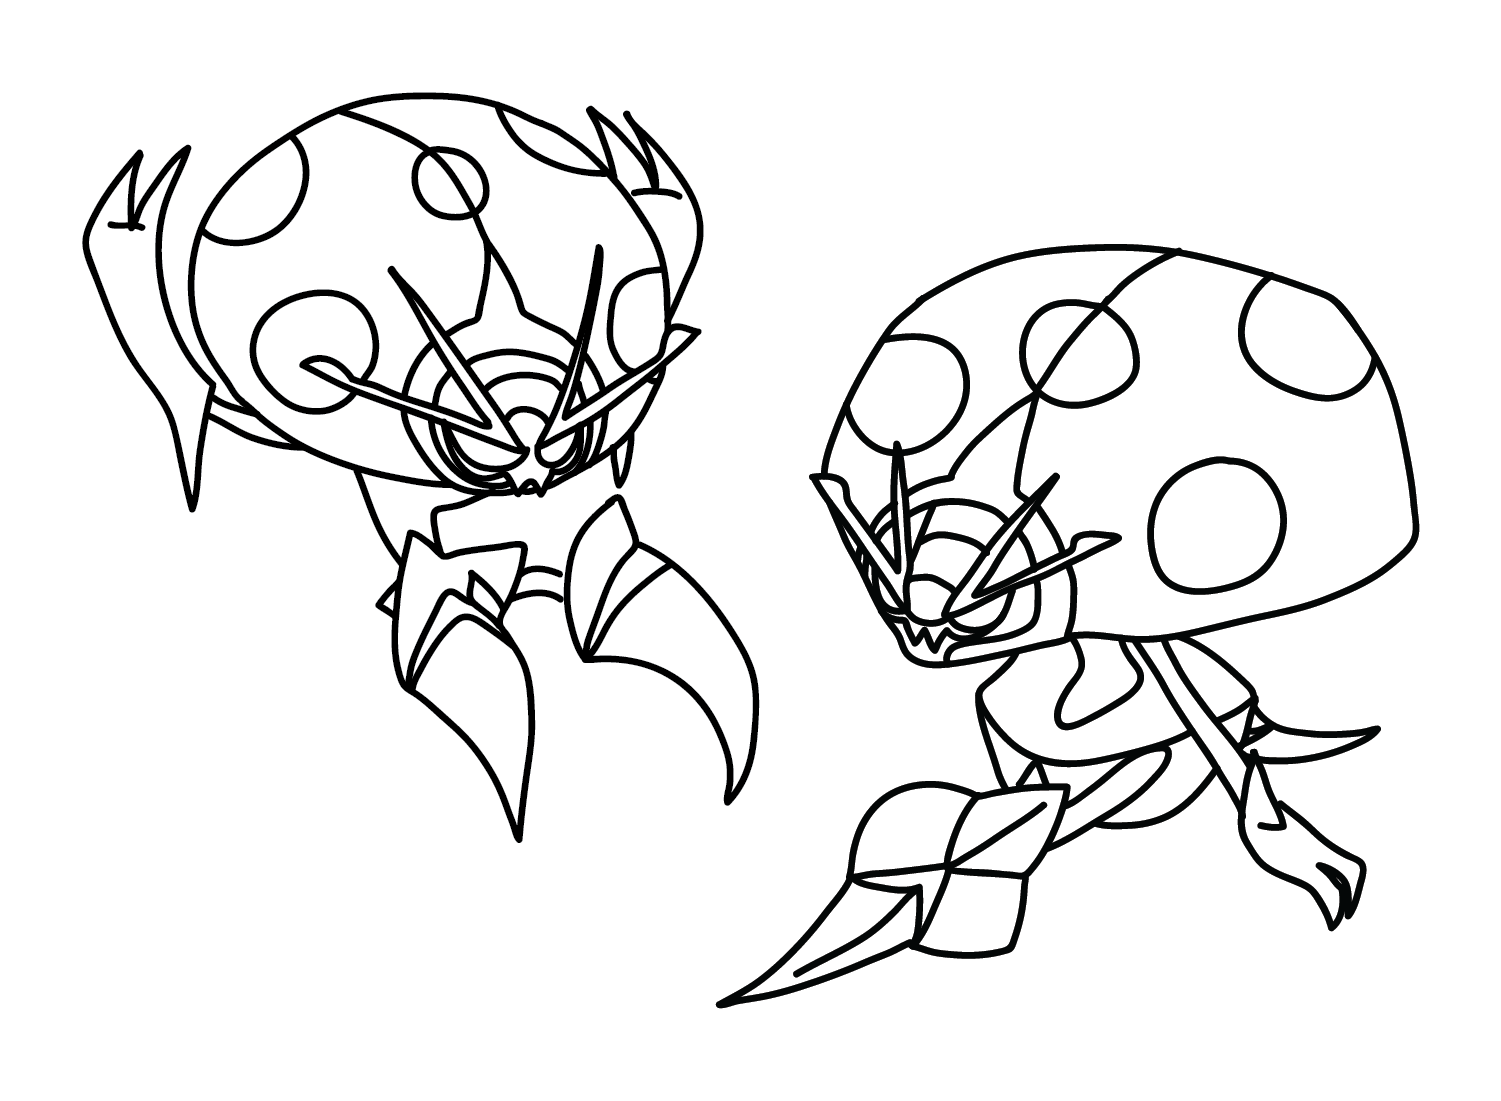 The Pokemon Orbeetle Coloring Page